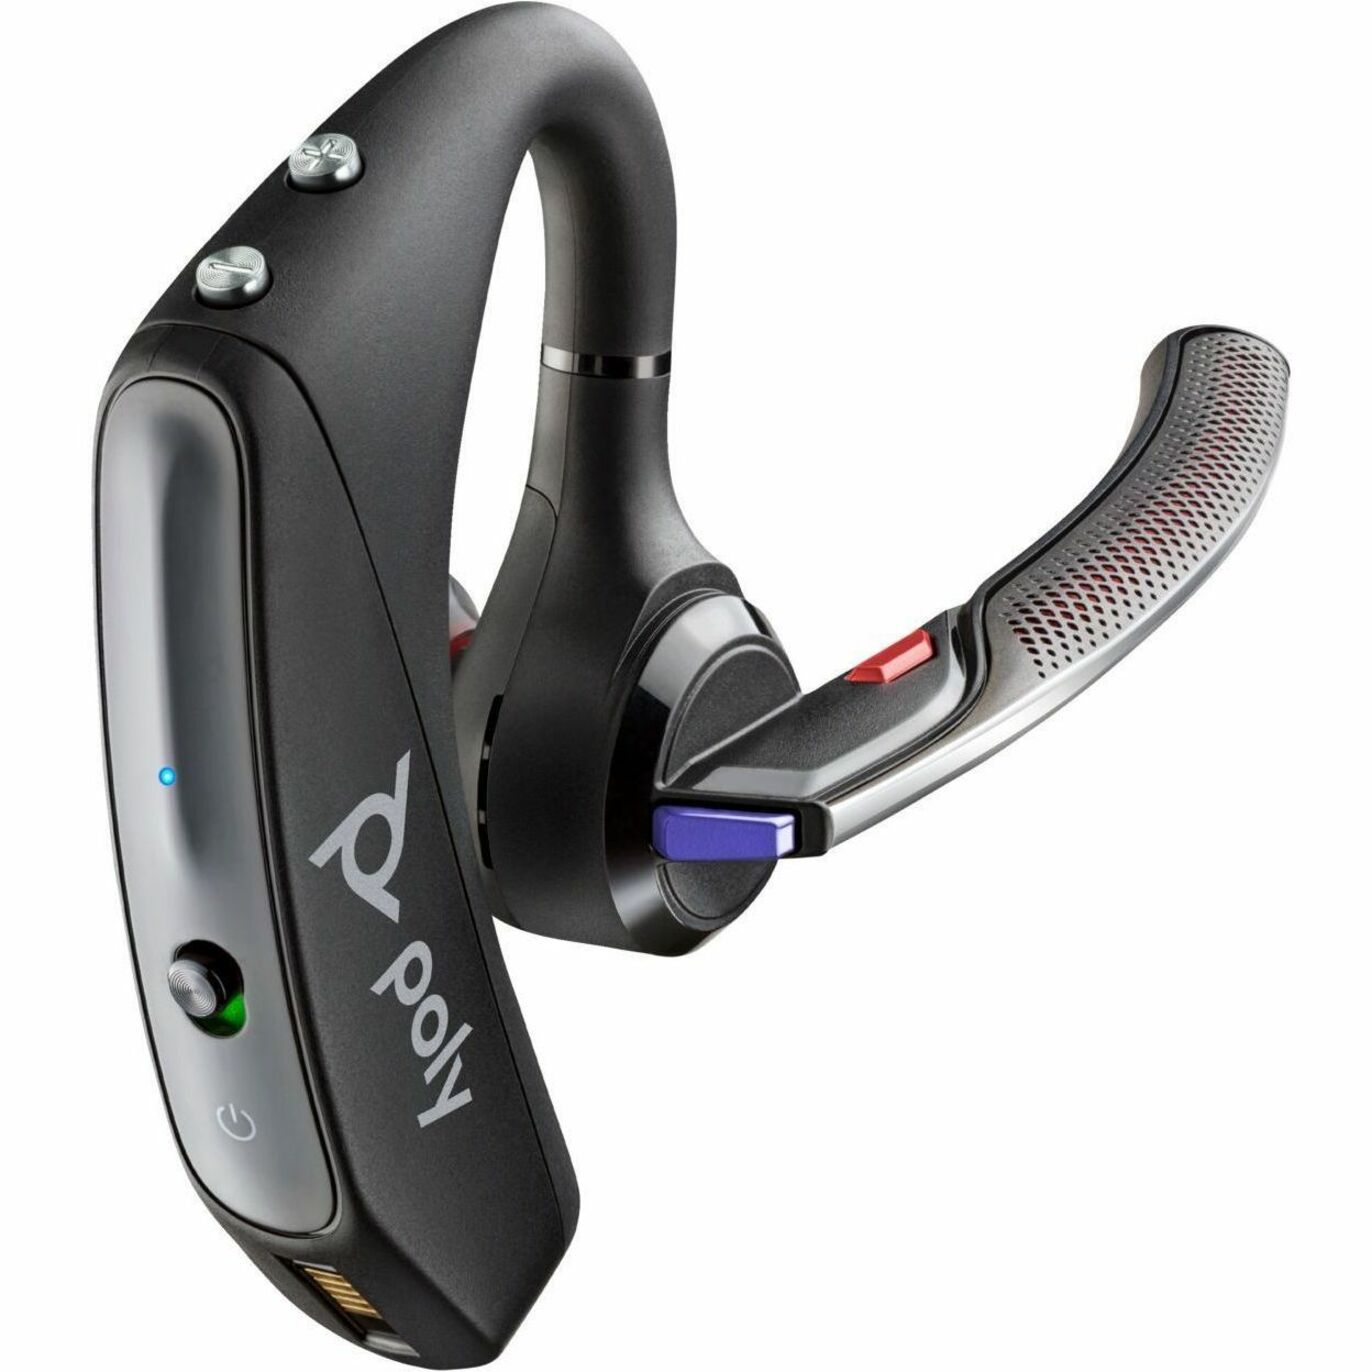 Poly Voyager 5200-M Office Headset + USB-C to Micro USB Cable TAA, Mono Earset, Noise Cancelling, Wideband Audio